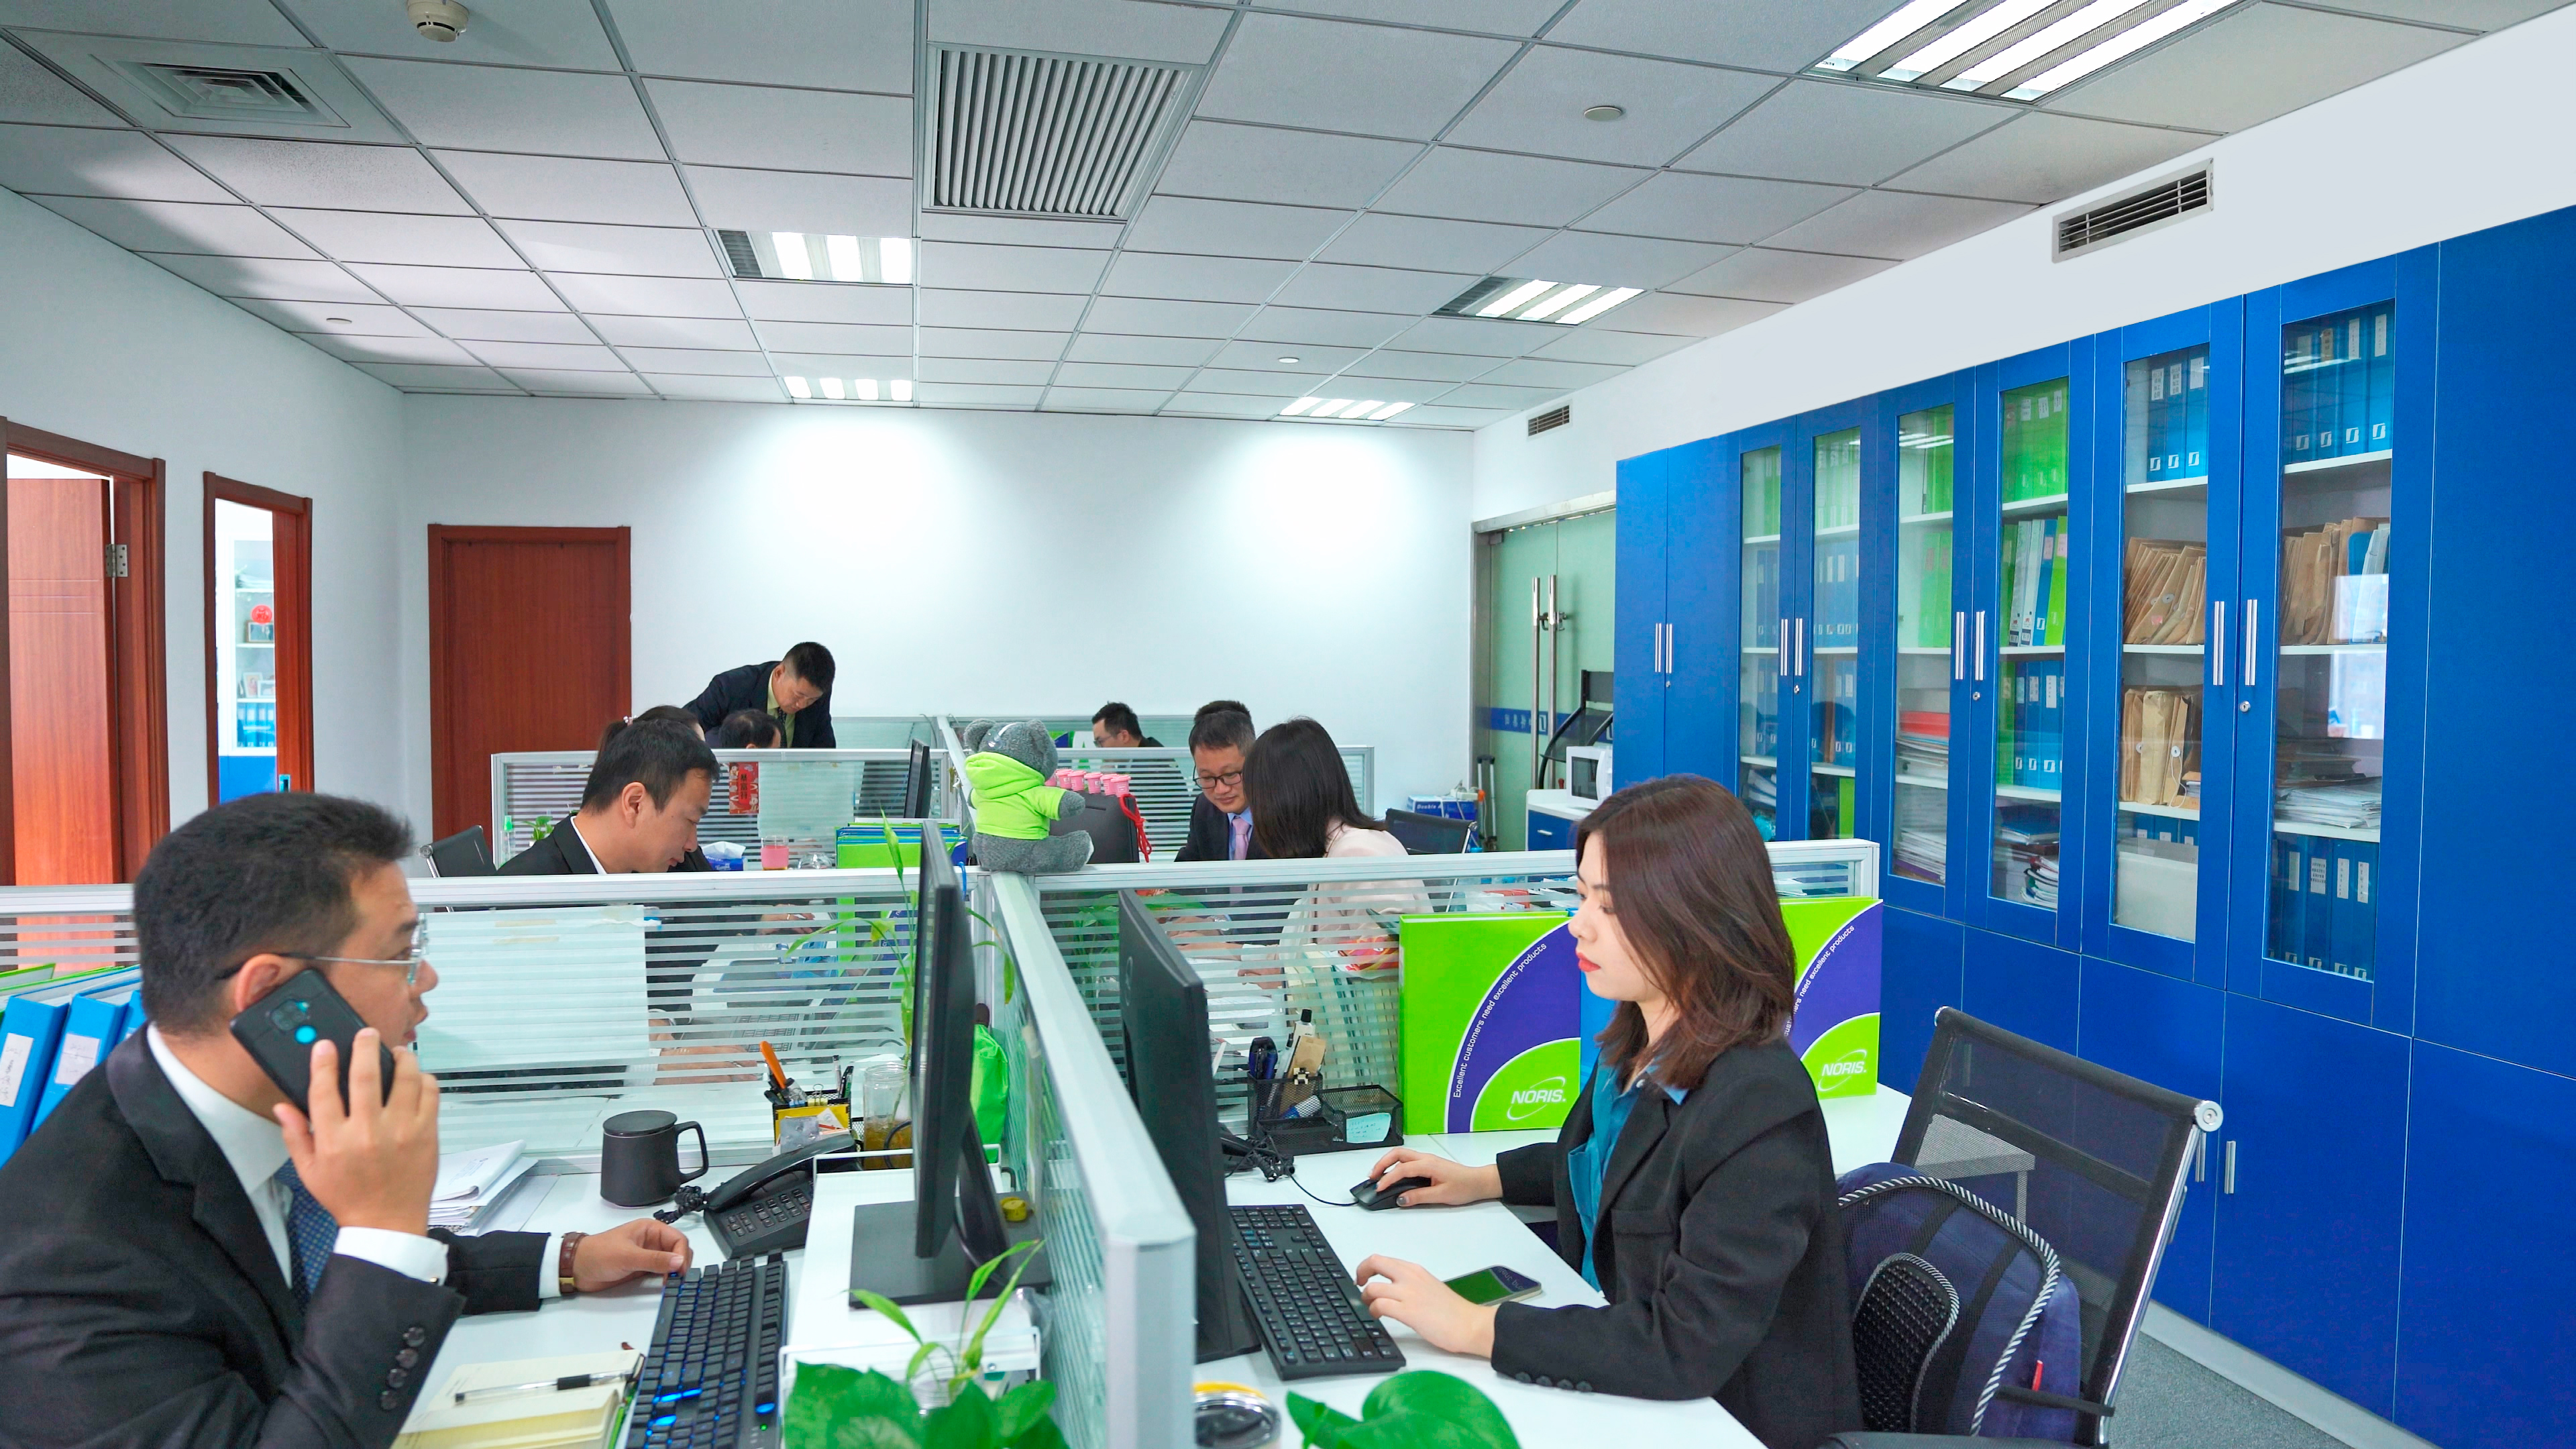 The image shows the Noris-Sibo Automation team in company office